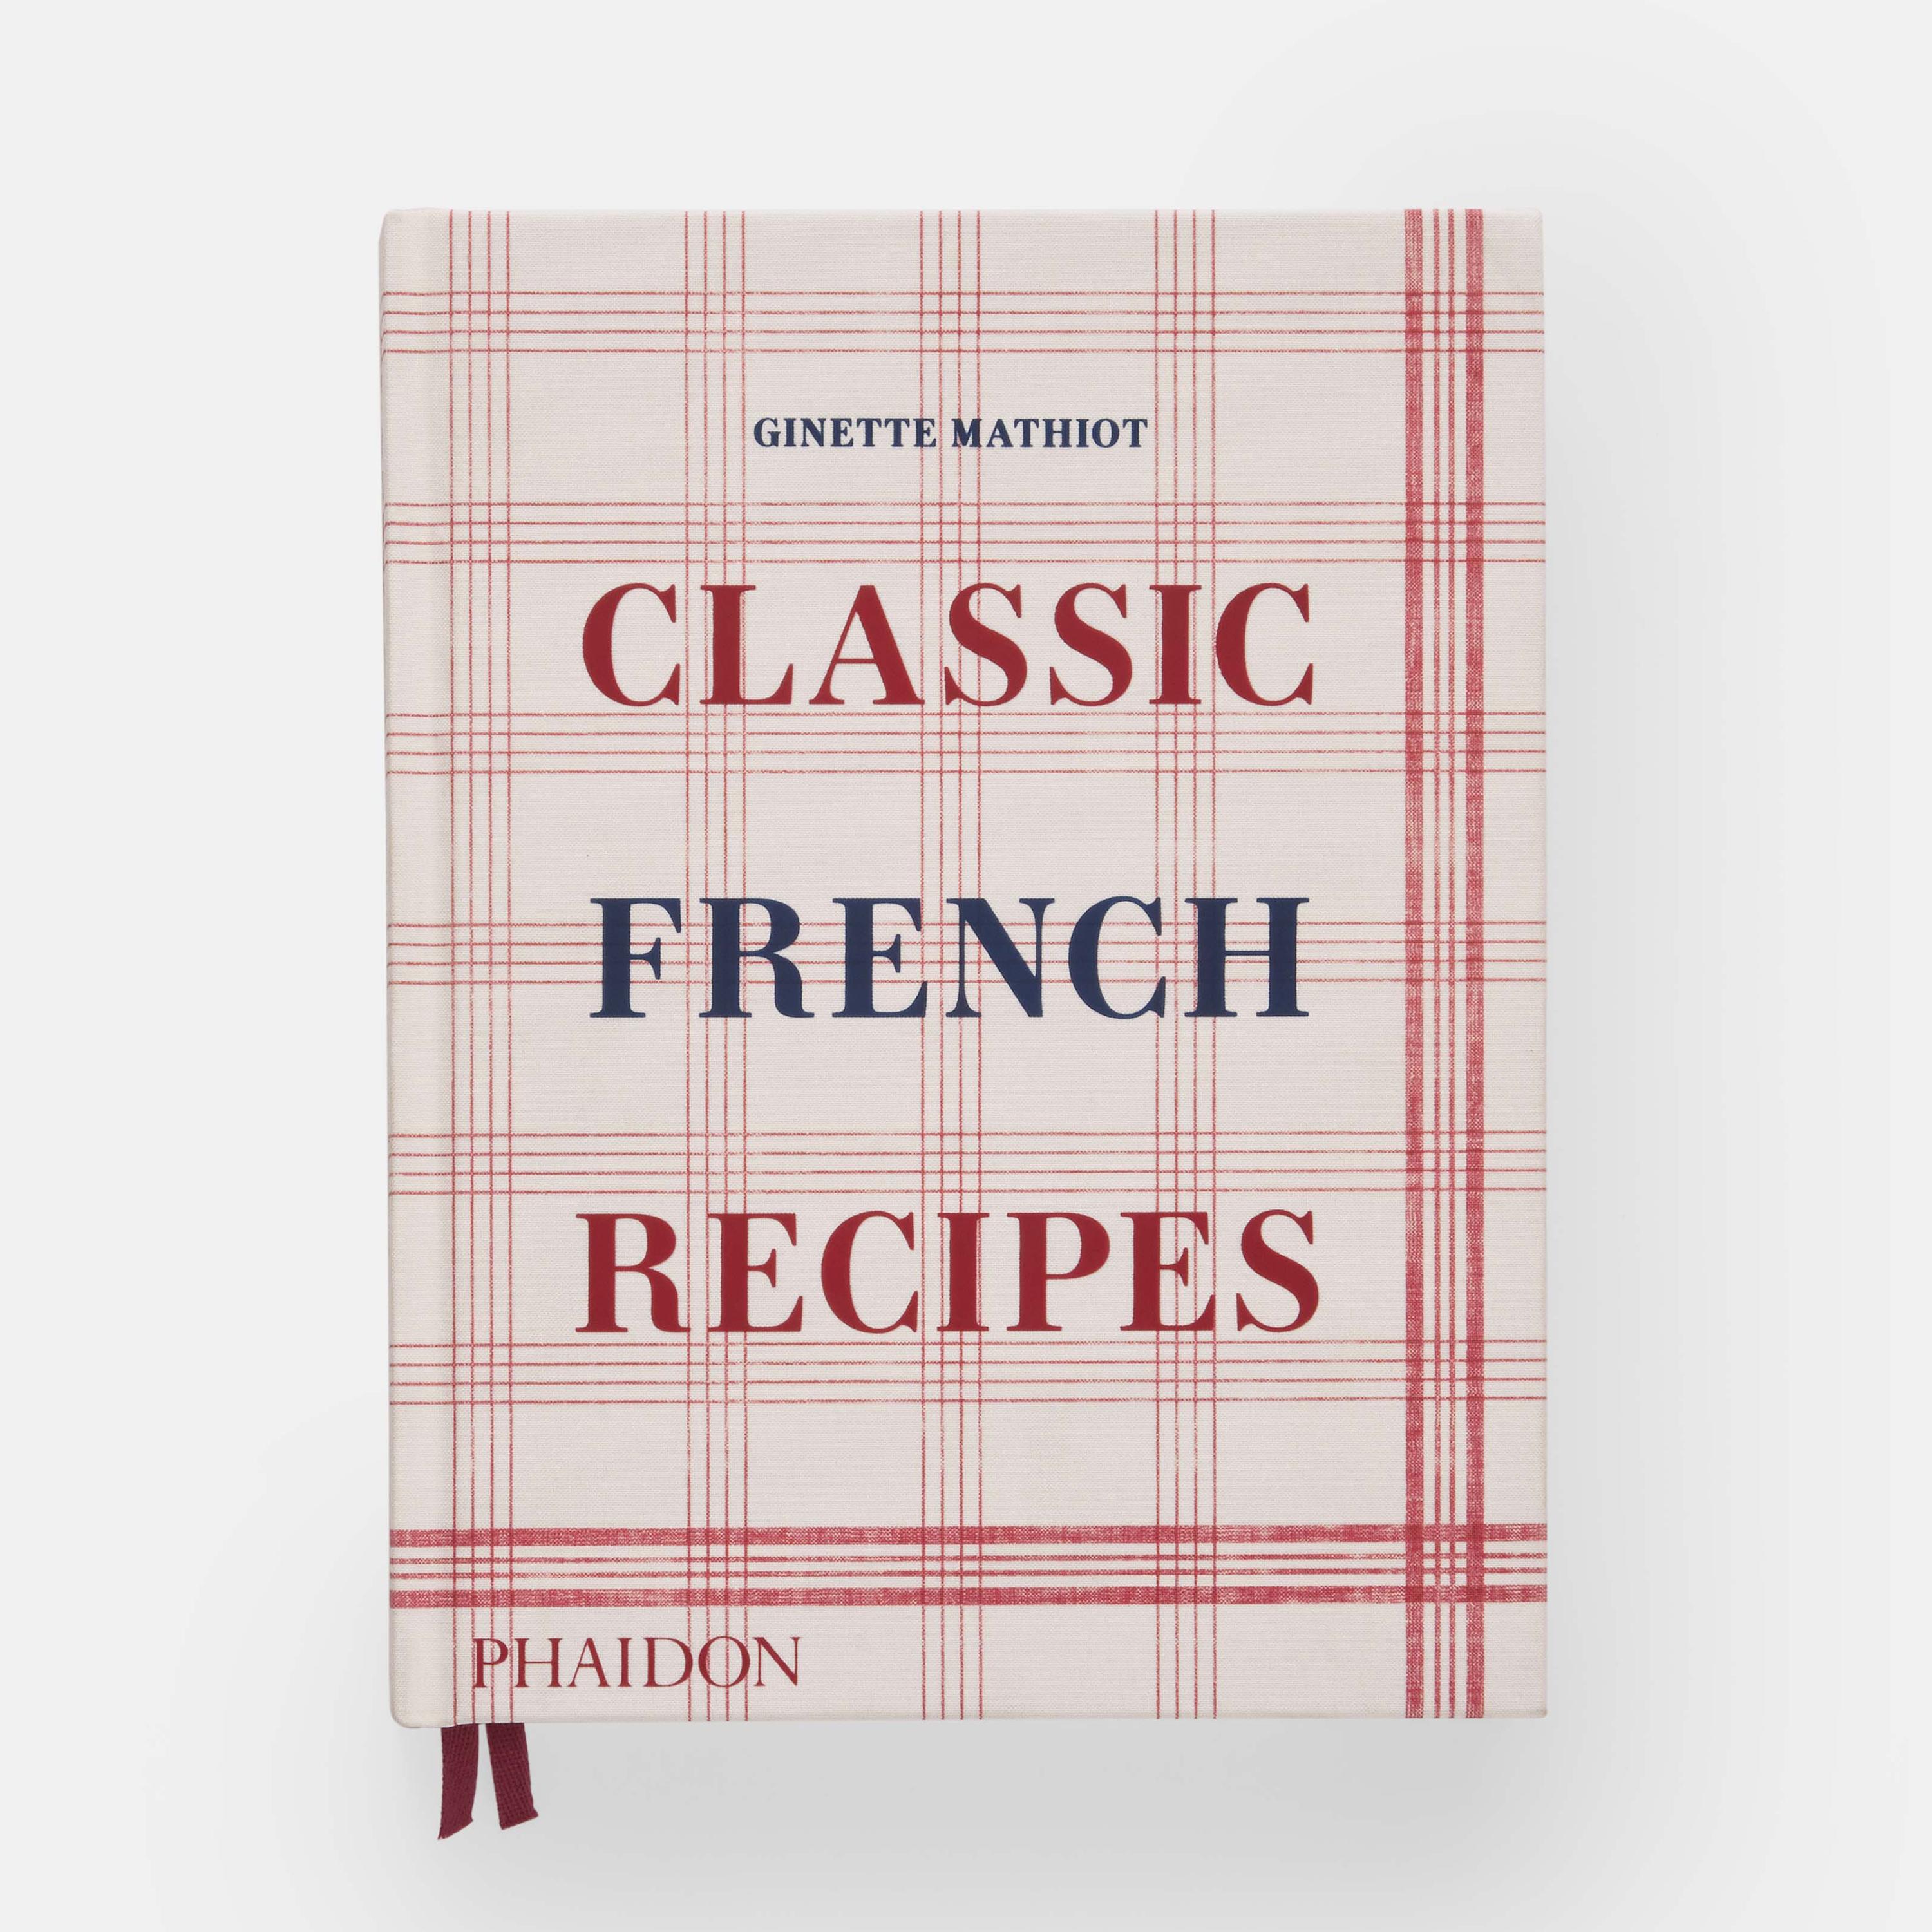 'An excellent, encouraging introduction to French home cooking by an author who combines the best culinary qualities of Gallic versions of Irma Rombauer and Fannie Farmer, with just a dash of Ratatouille’s beloved Chef Gusteau.' – Library Journal,